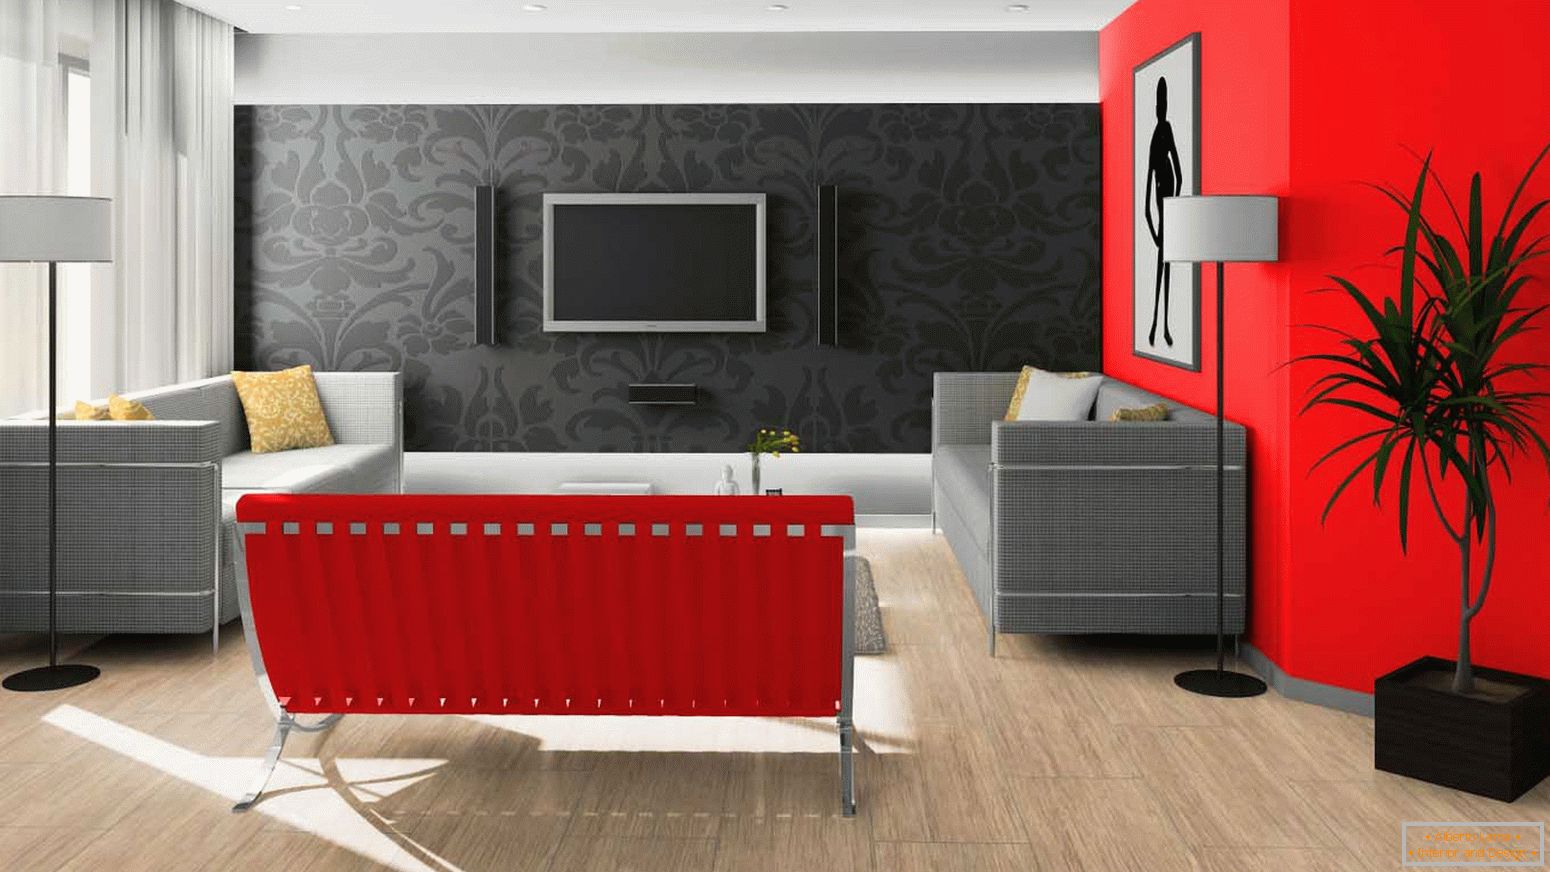 Black and red in the design of the living room